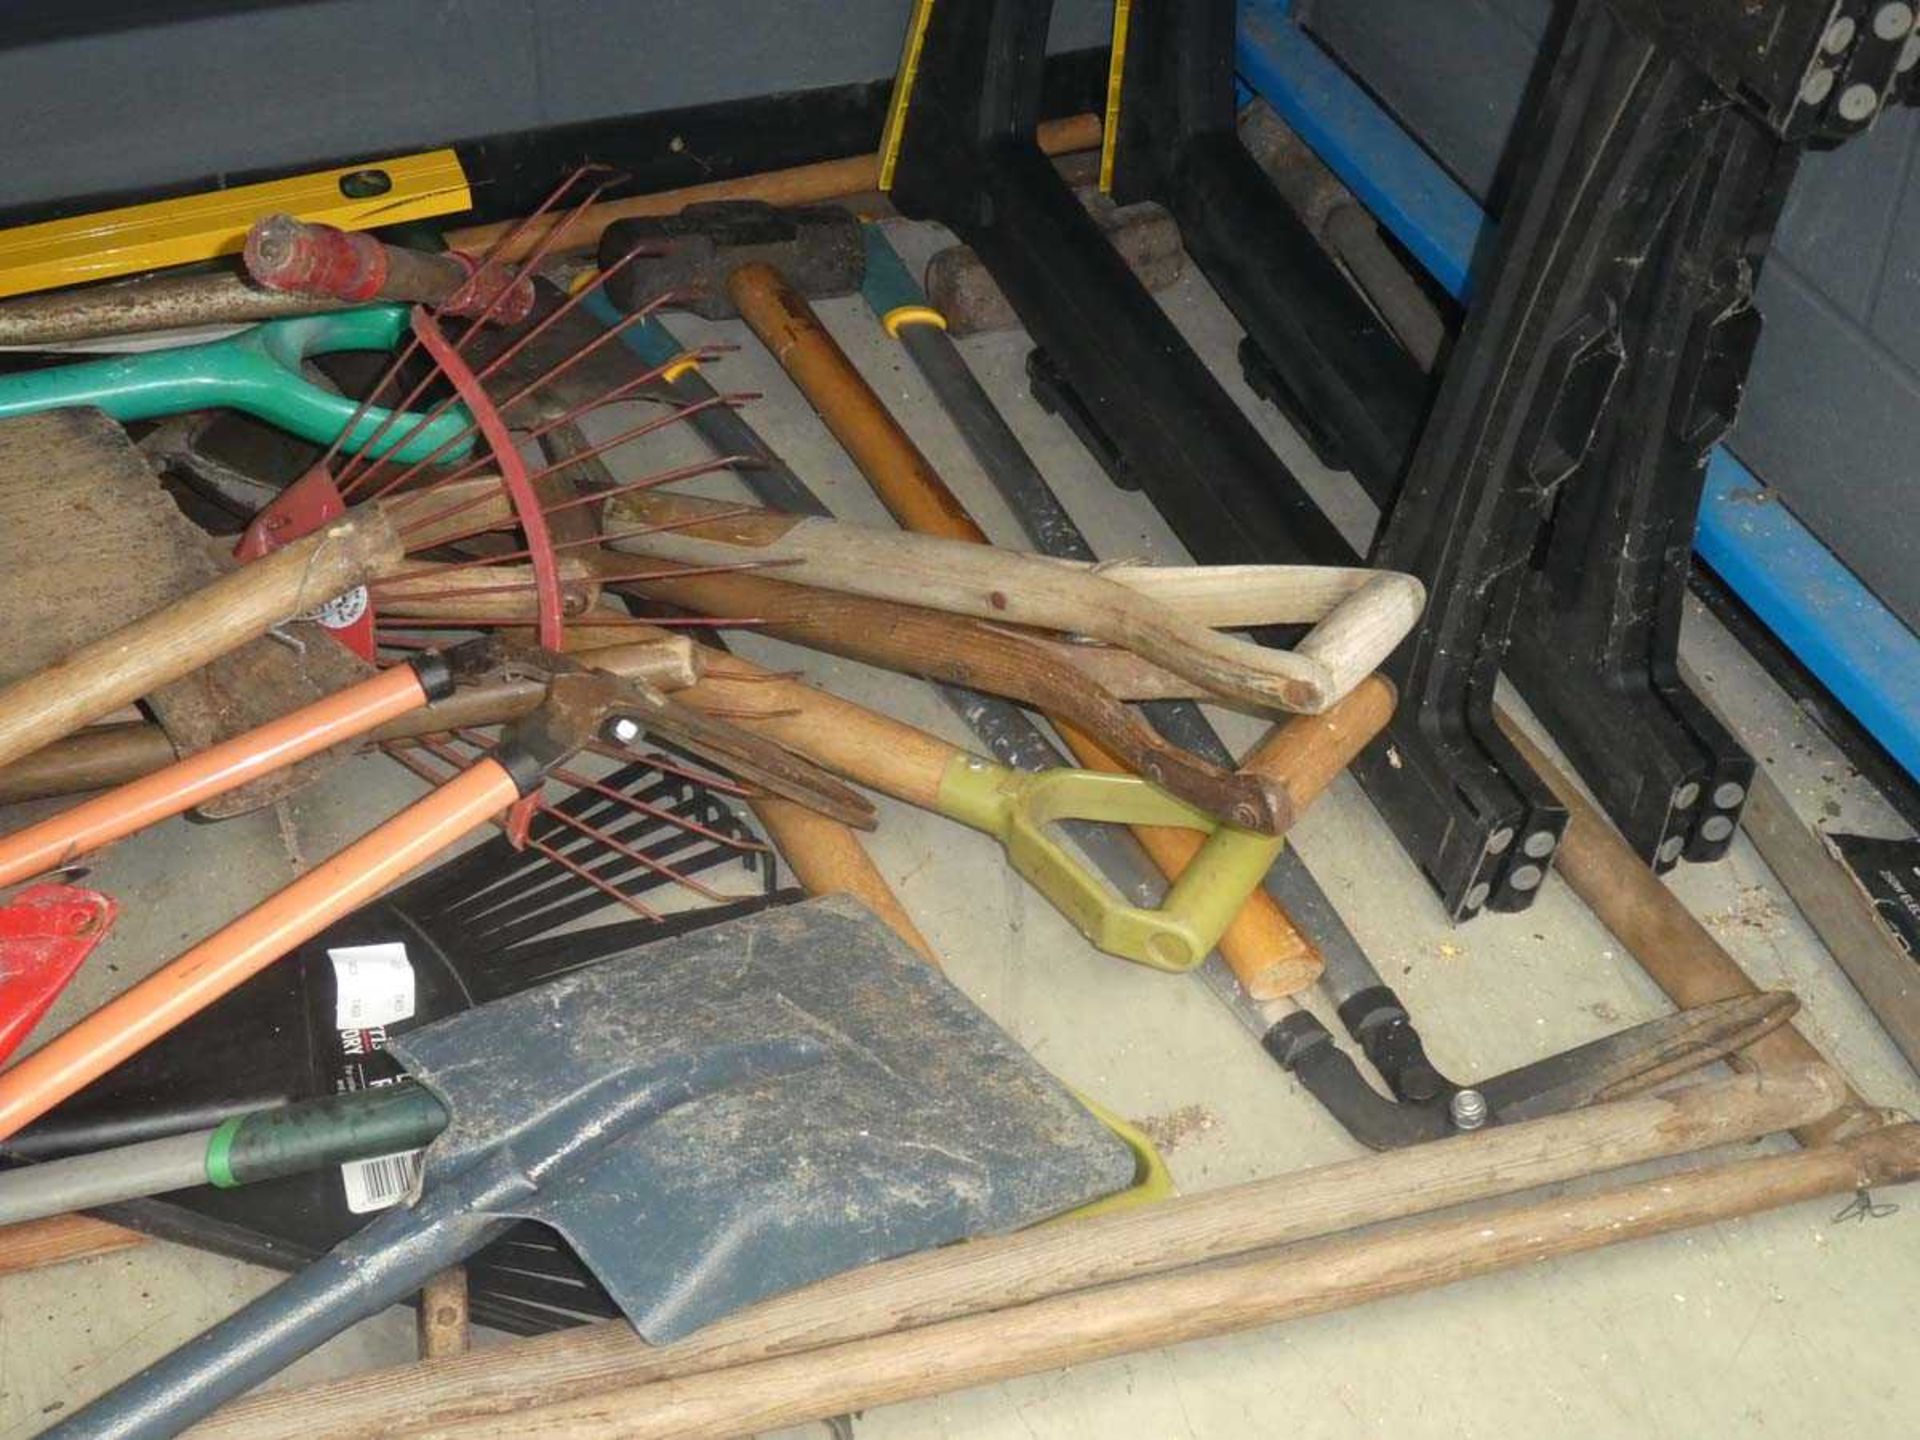 3/4 underbay of garden tools including shovels, forks, saws, loppers, rakes, sawhorses etc. - Image 3 of 3